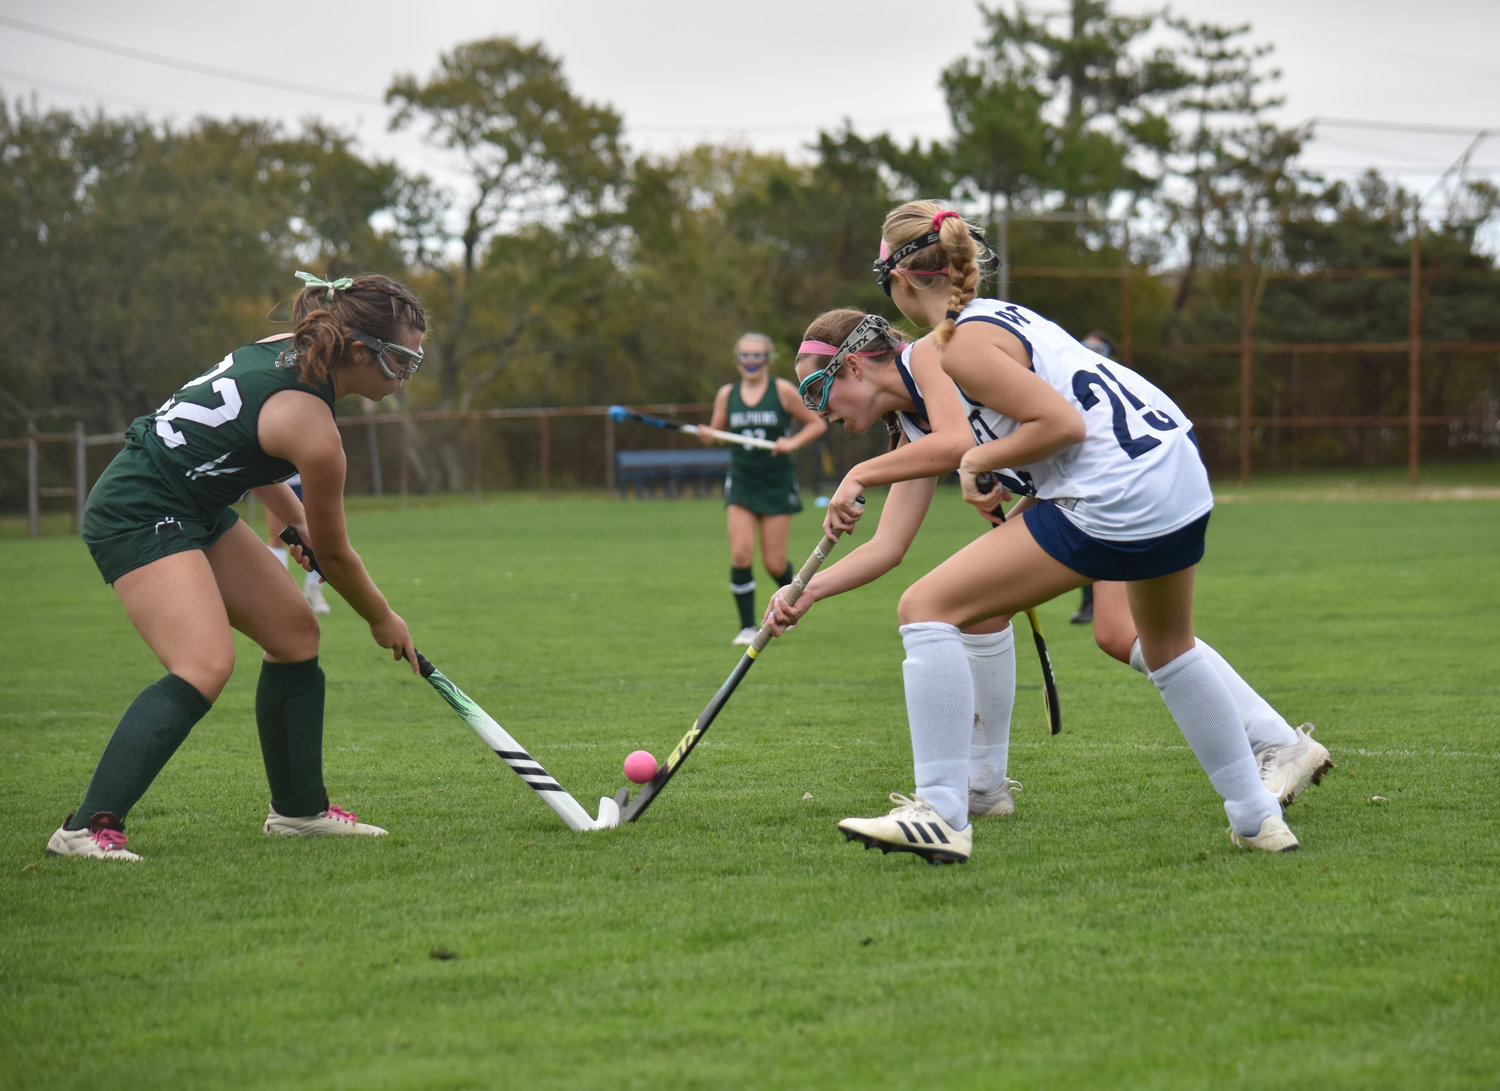 Lillian Wullschleger, right, and a Dennis-Yarmouth player battle for the ball while Clementine Kelly (25) watches.